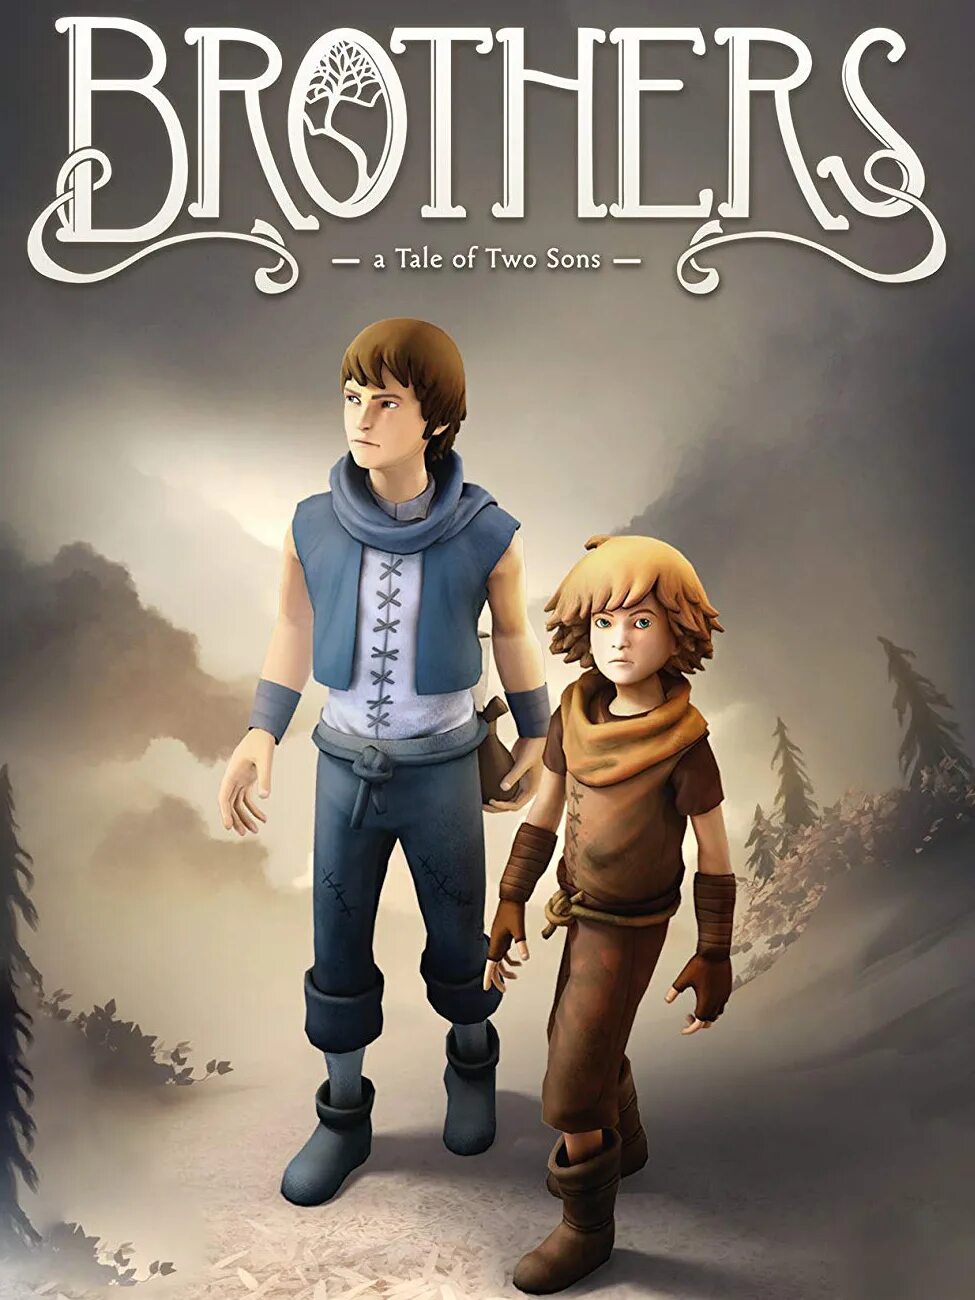 Xbox игра brothers: a Tale of two sons. Brothers: a Tale of two sons (2013). Brothers: a Tale of two sons обложка. Игра брат. A tale of two sons ps4